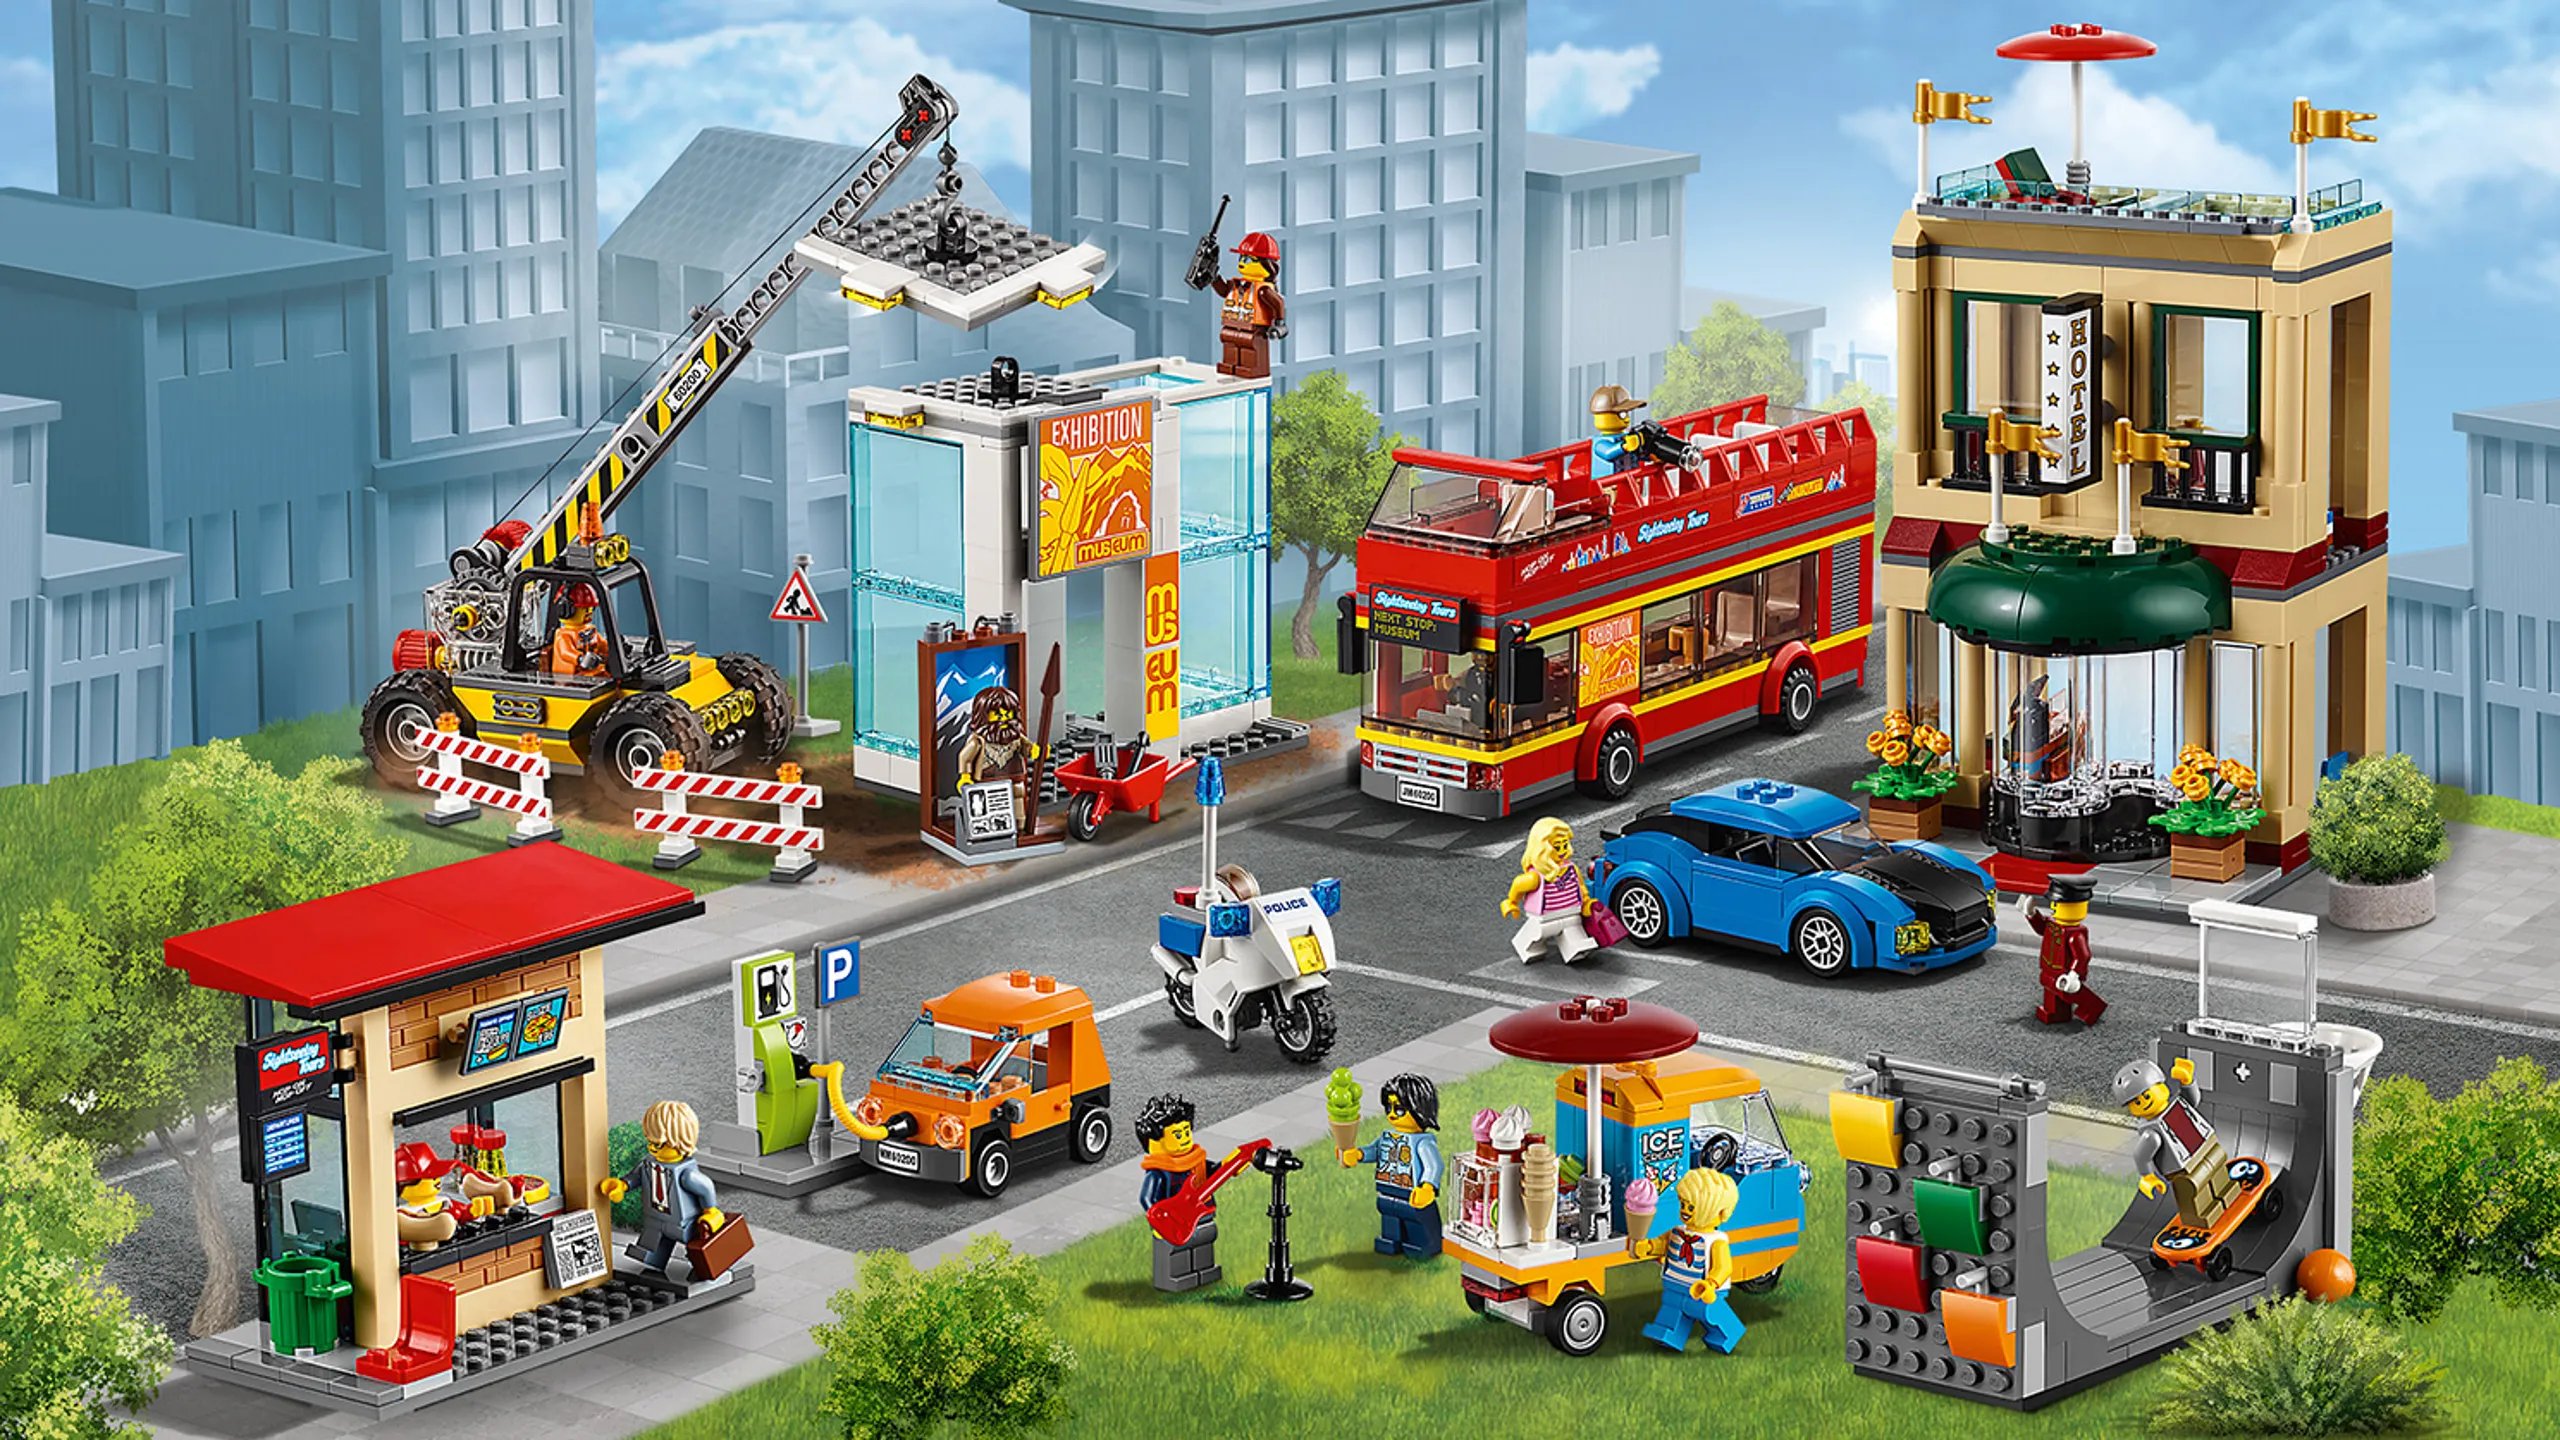 LEGO City Town - 60200 Capital City - The city has a kiosk, a gas station, a construction site, a hotel, their own police officer, a double decker tourist bus and a park with skate ramp, street musician and an ice cream truck.